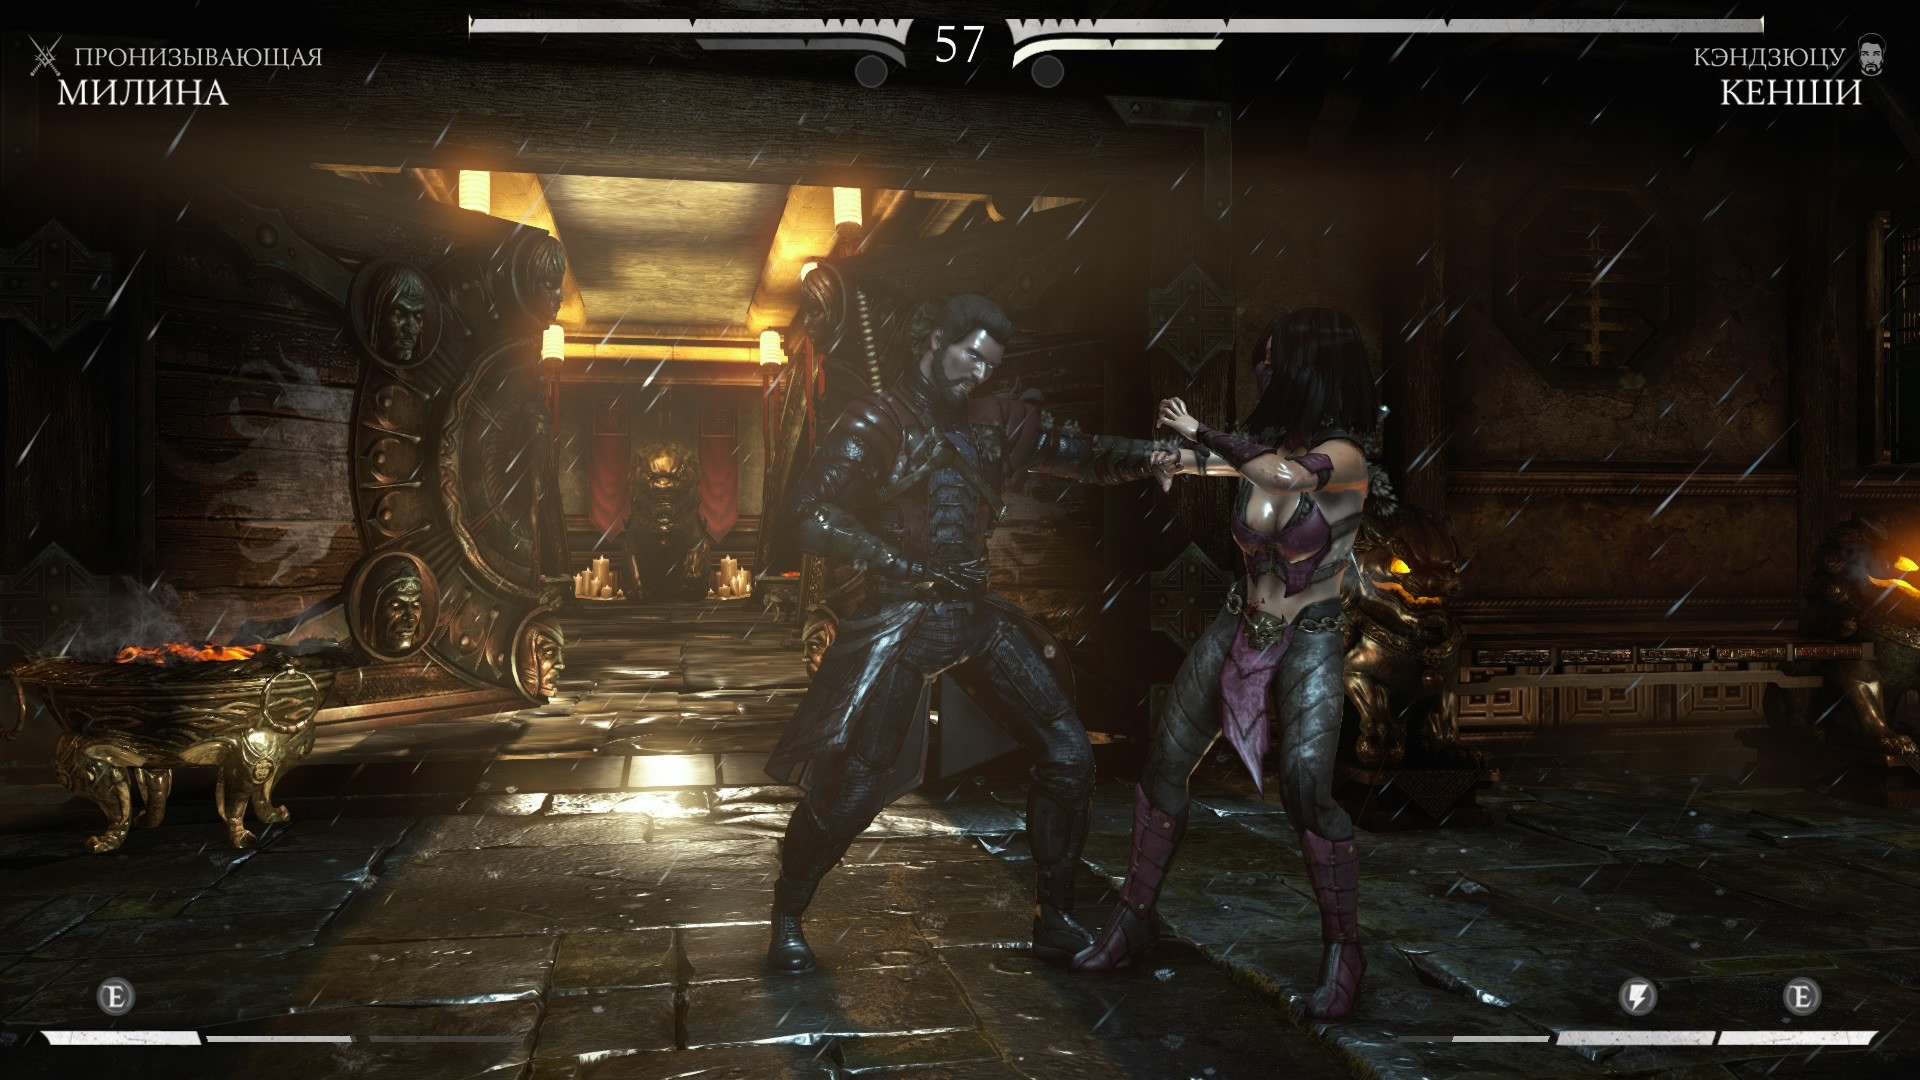 MKX